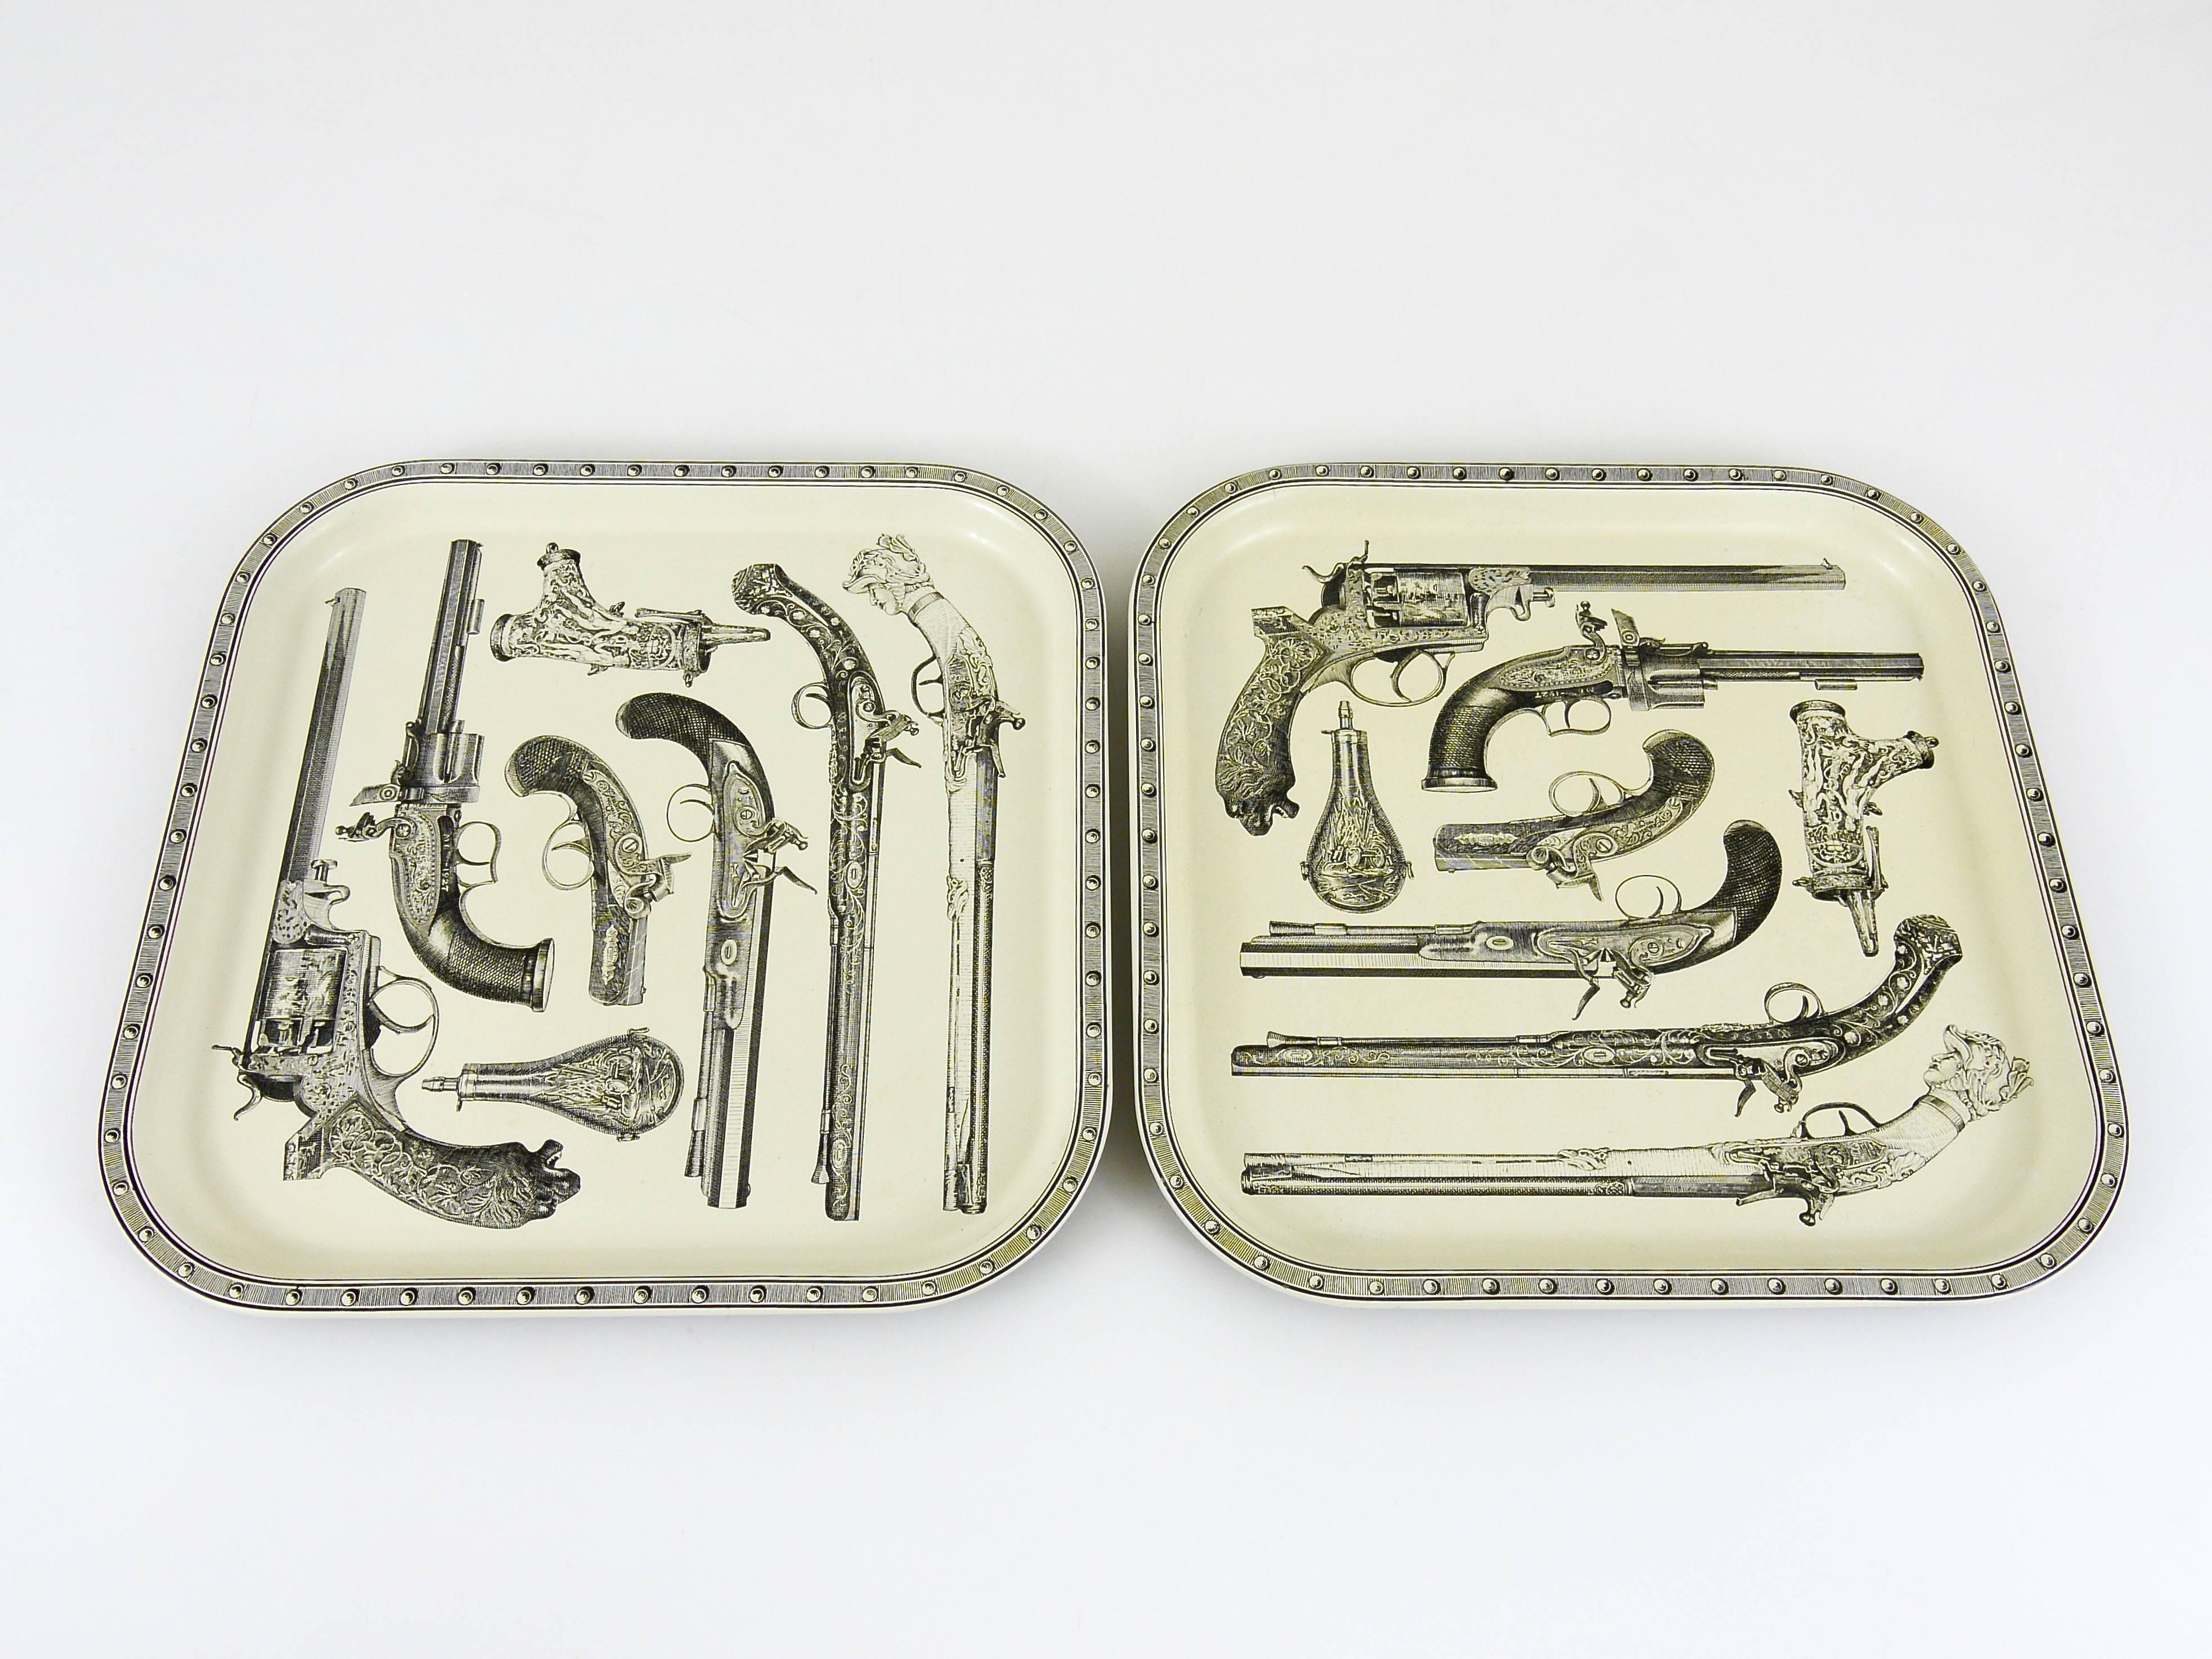 One beautiful and decorative square serving tray, made of metal, with a nice pistols and guns pattern. From the 1960s, unmarked, in the manner of Studio Piero Fornasetti, Italy. In very good condition with marginal signs of wear on the underneath.